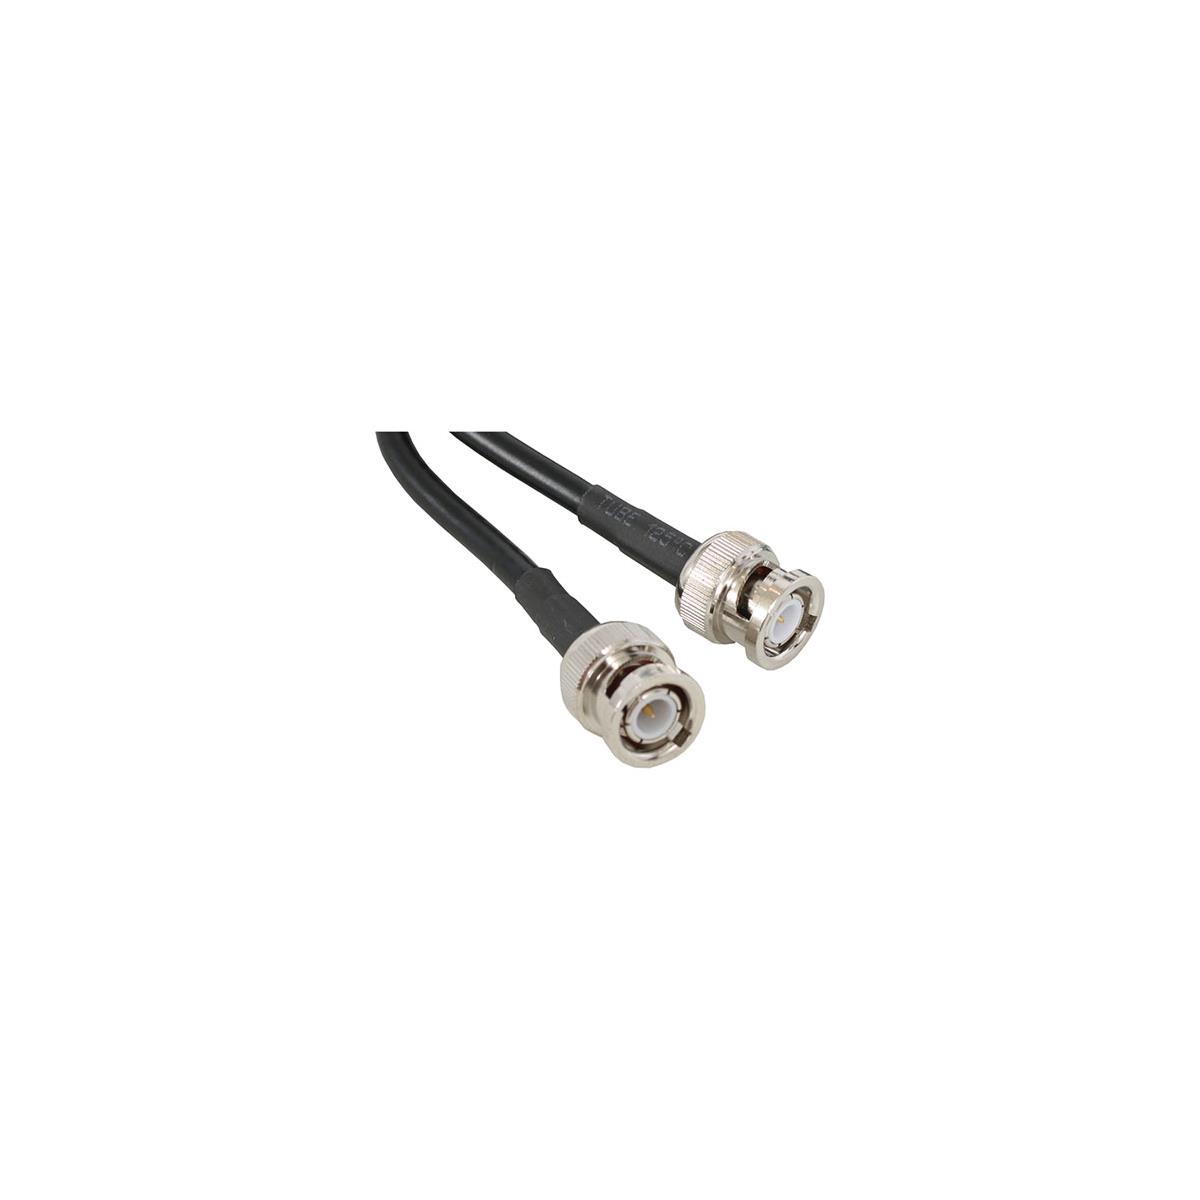 Image of Galaxy Audio 25' BNC Extension Cable for Front Mounting Antenna